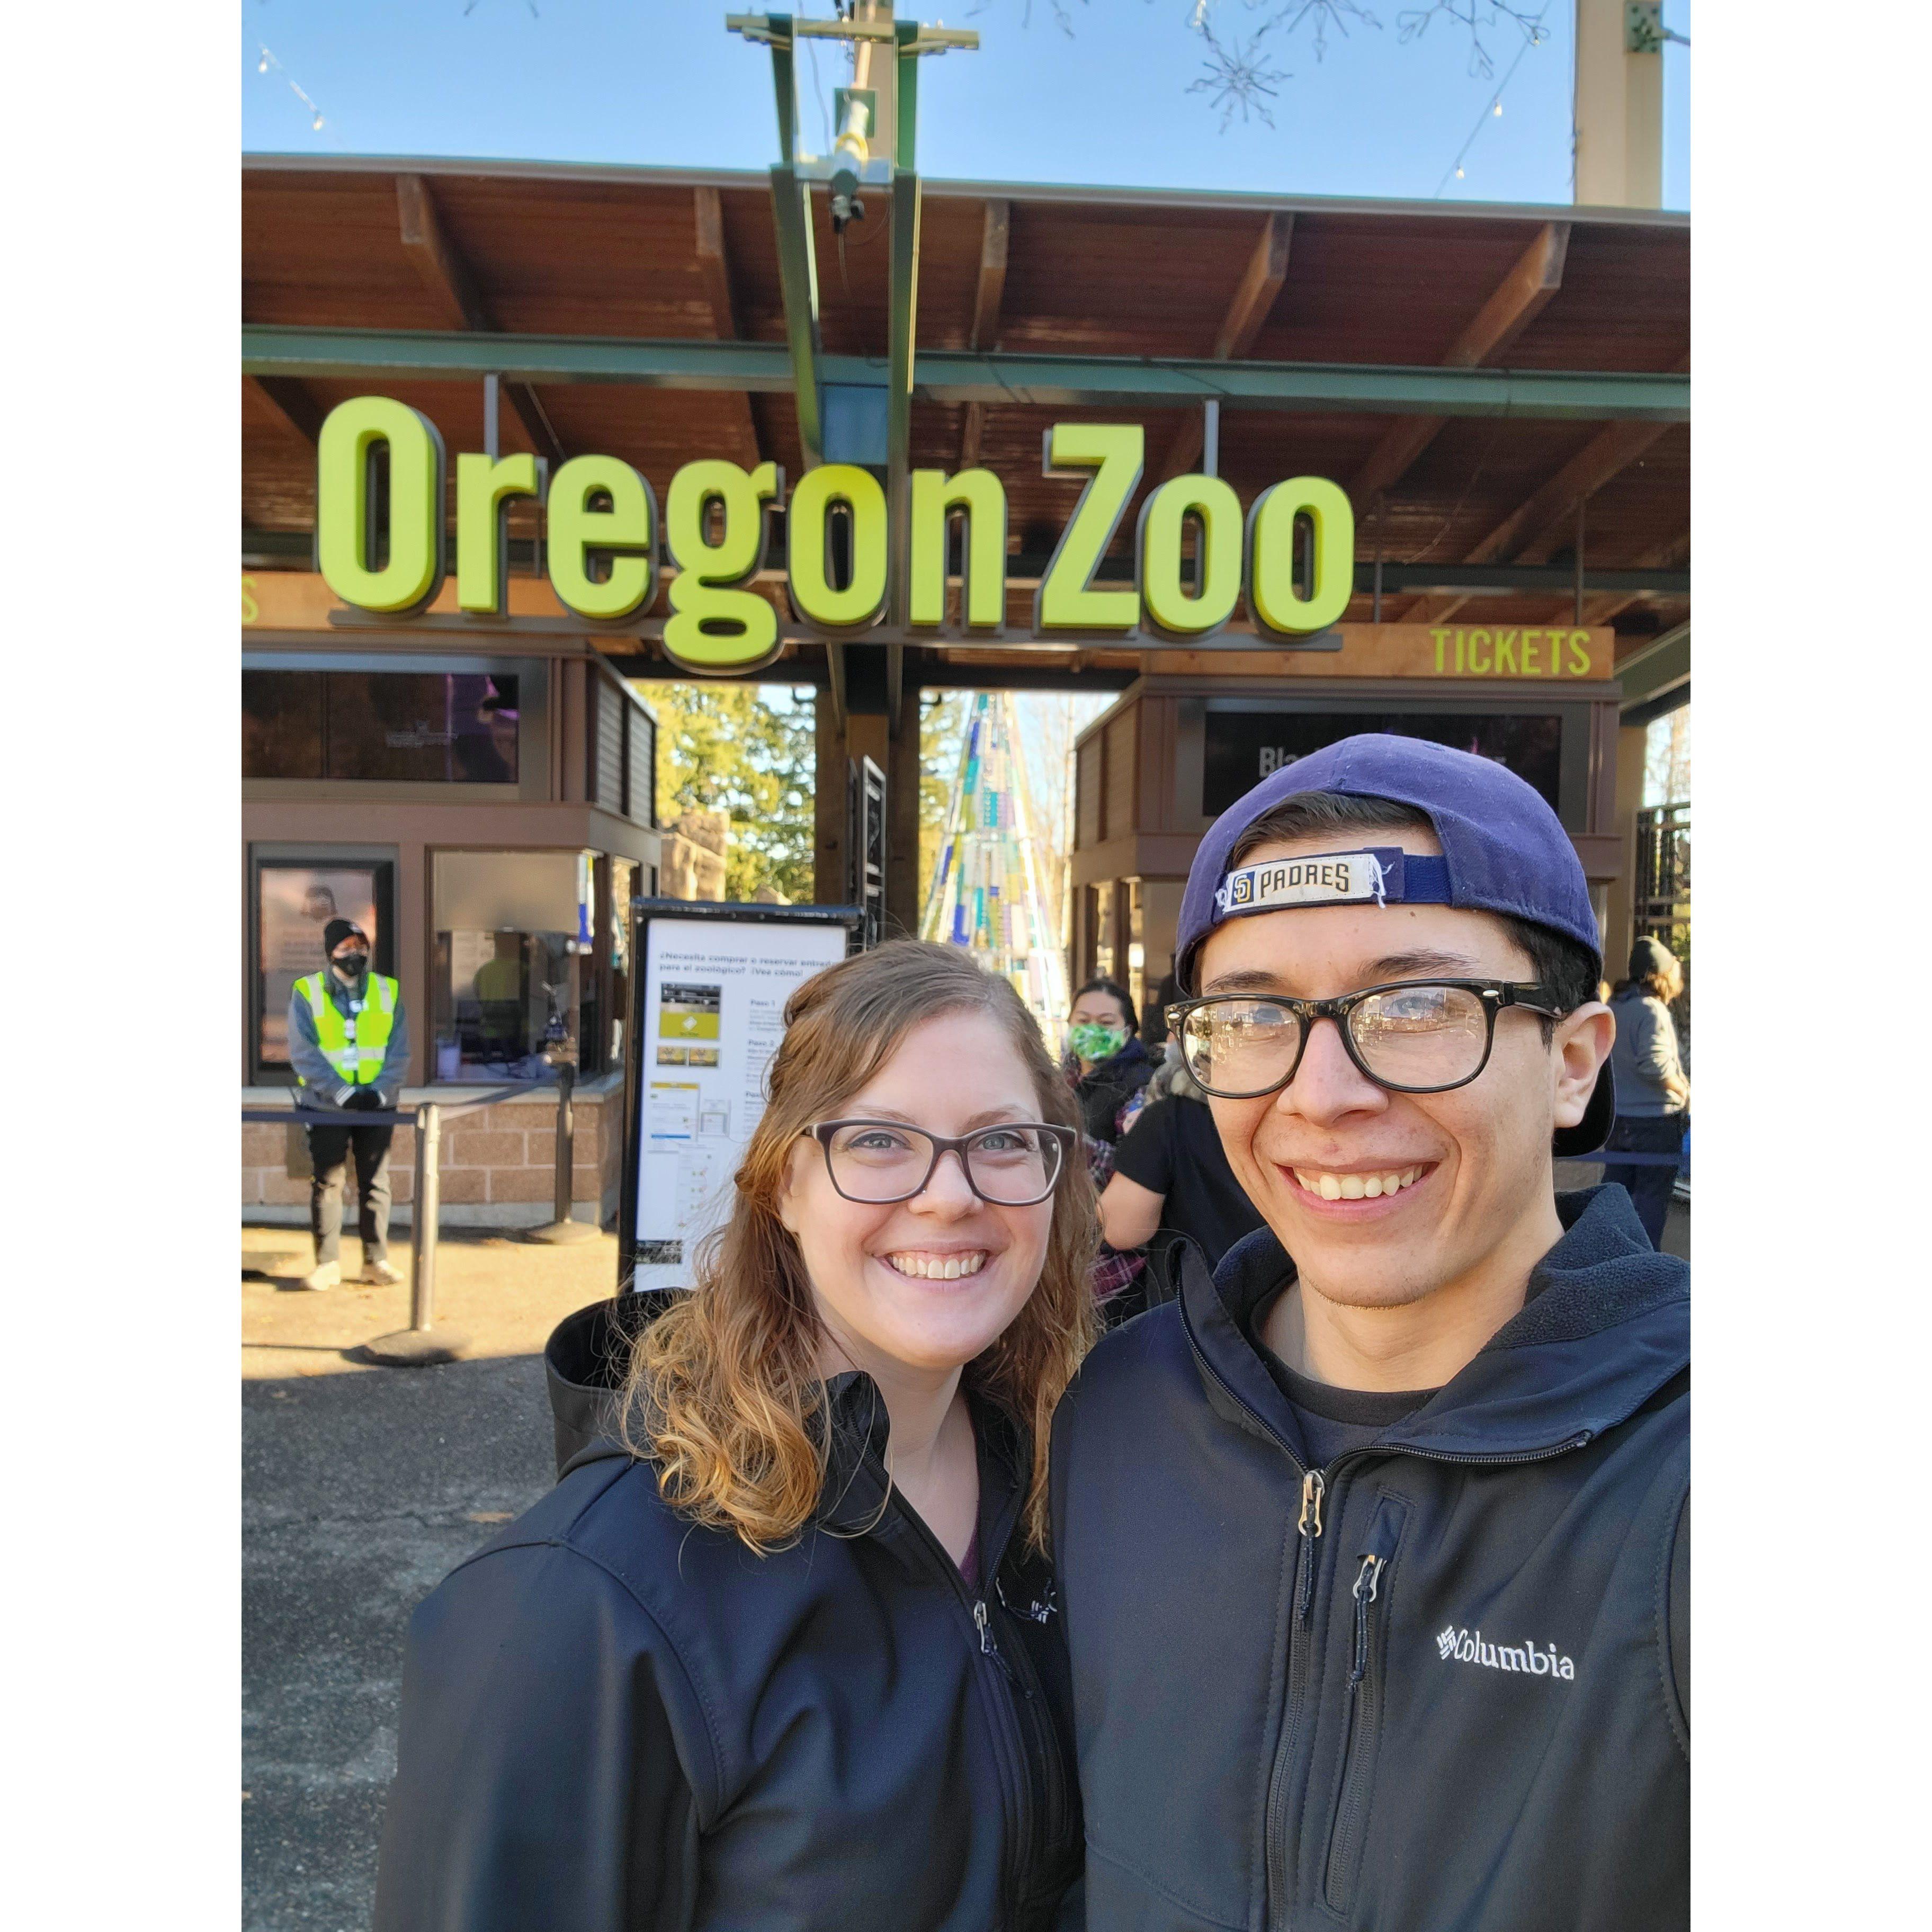 We enjoy getting out and visiting Zoos - 2022